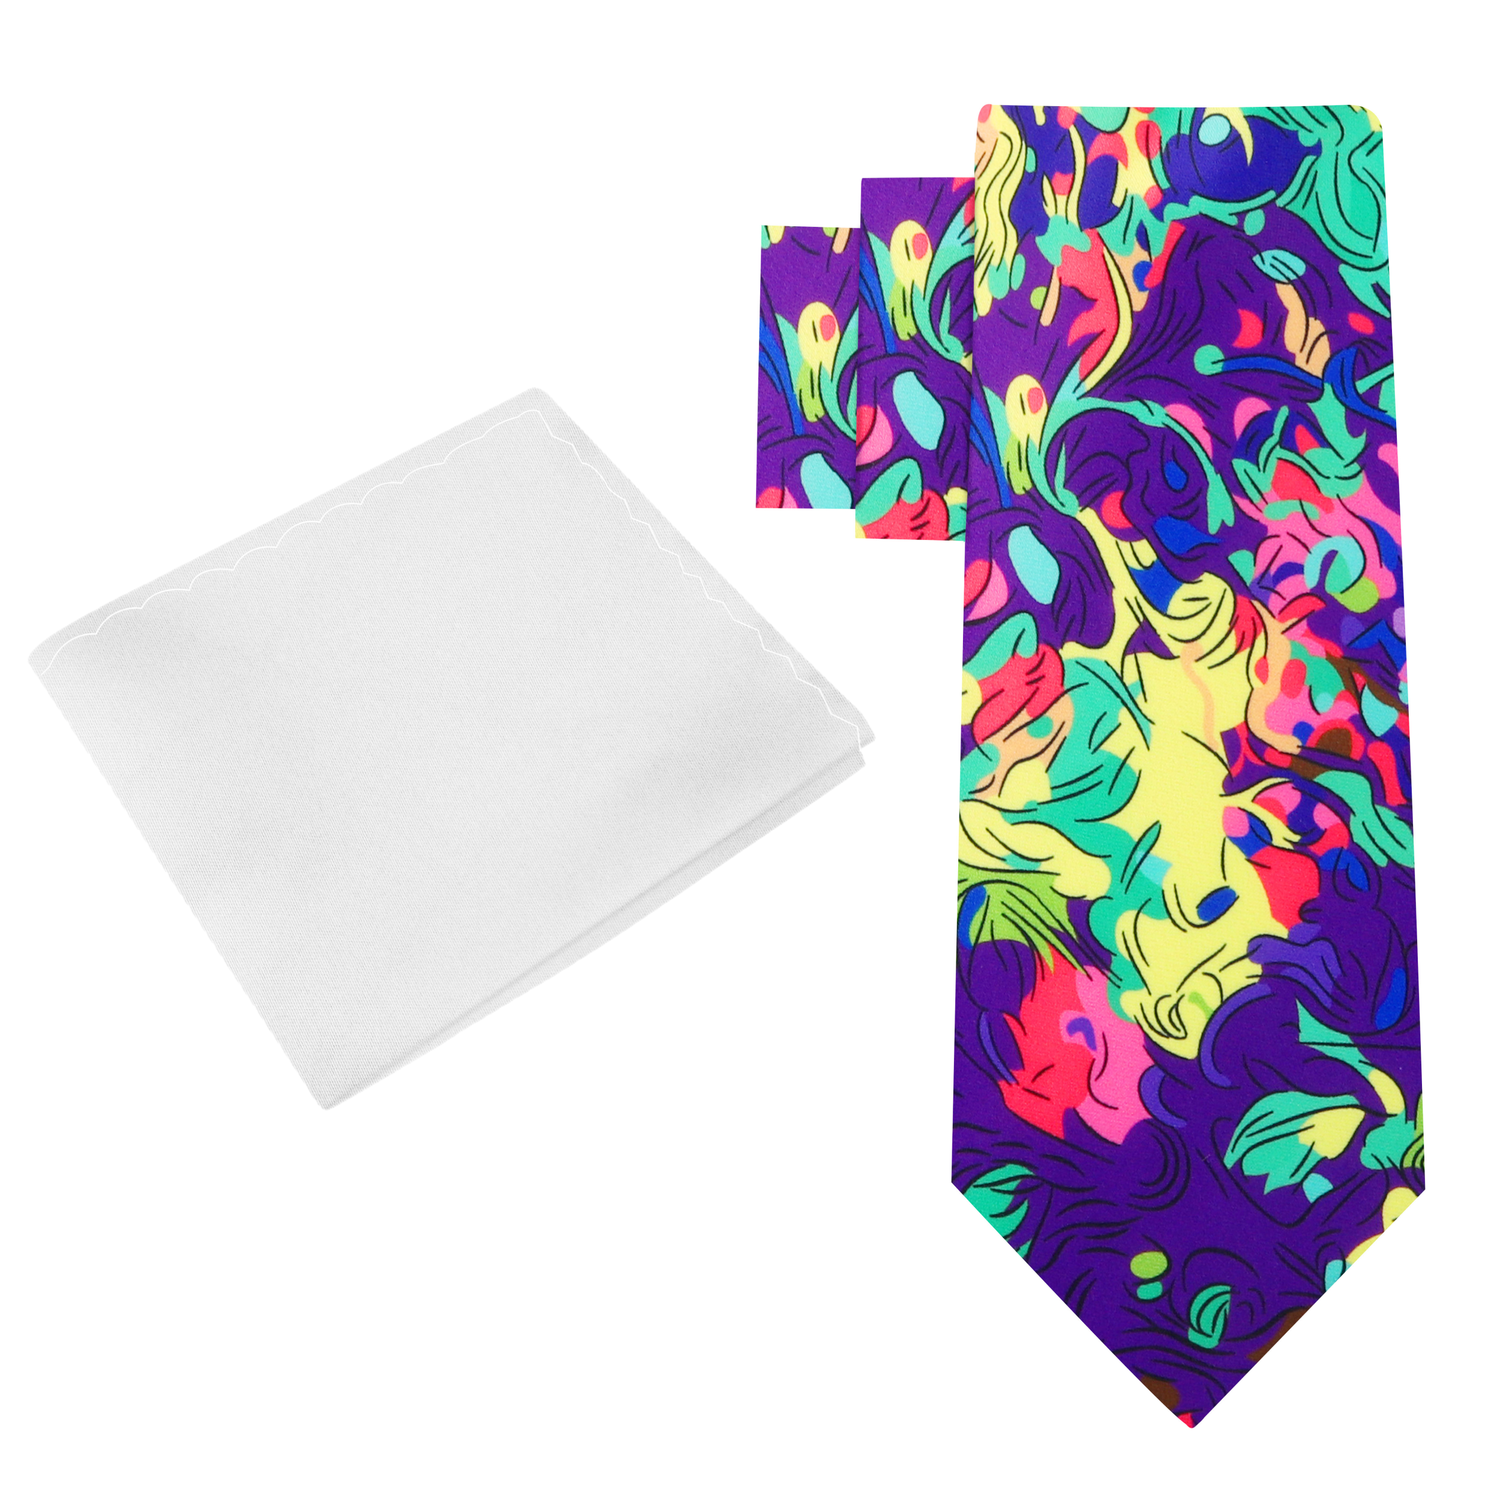 Alt View: Purple, Green, Yellow, Blue Abstract Necktie and White Square